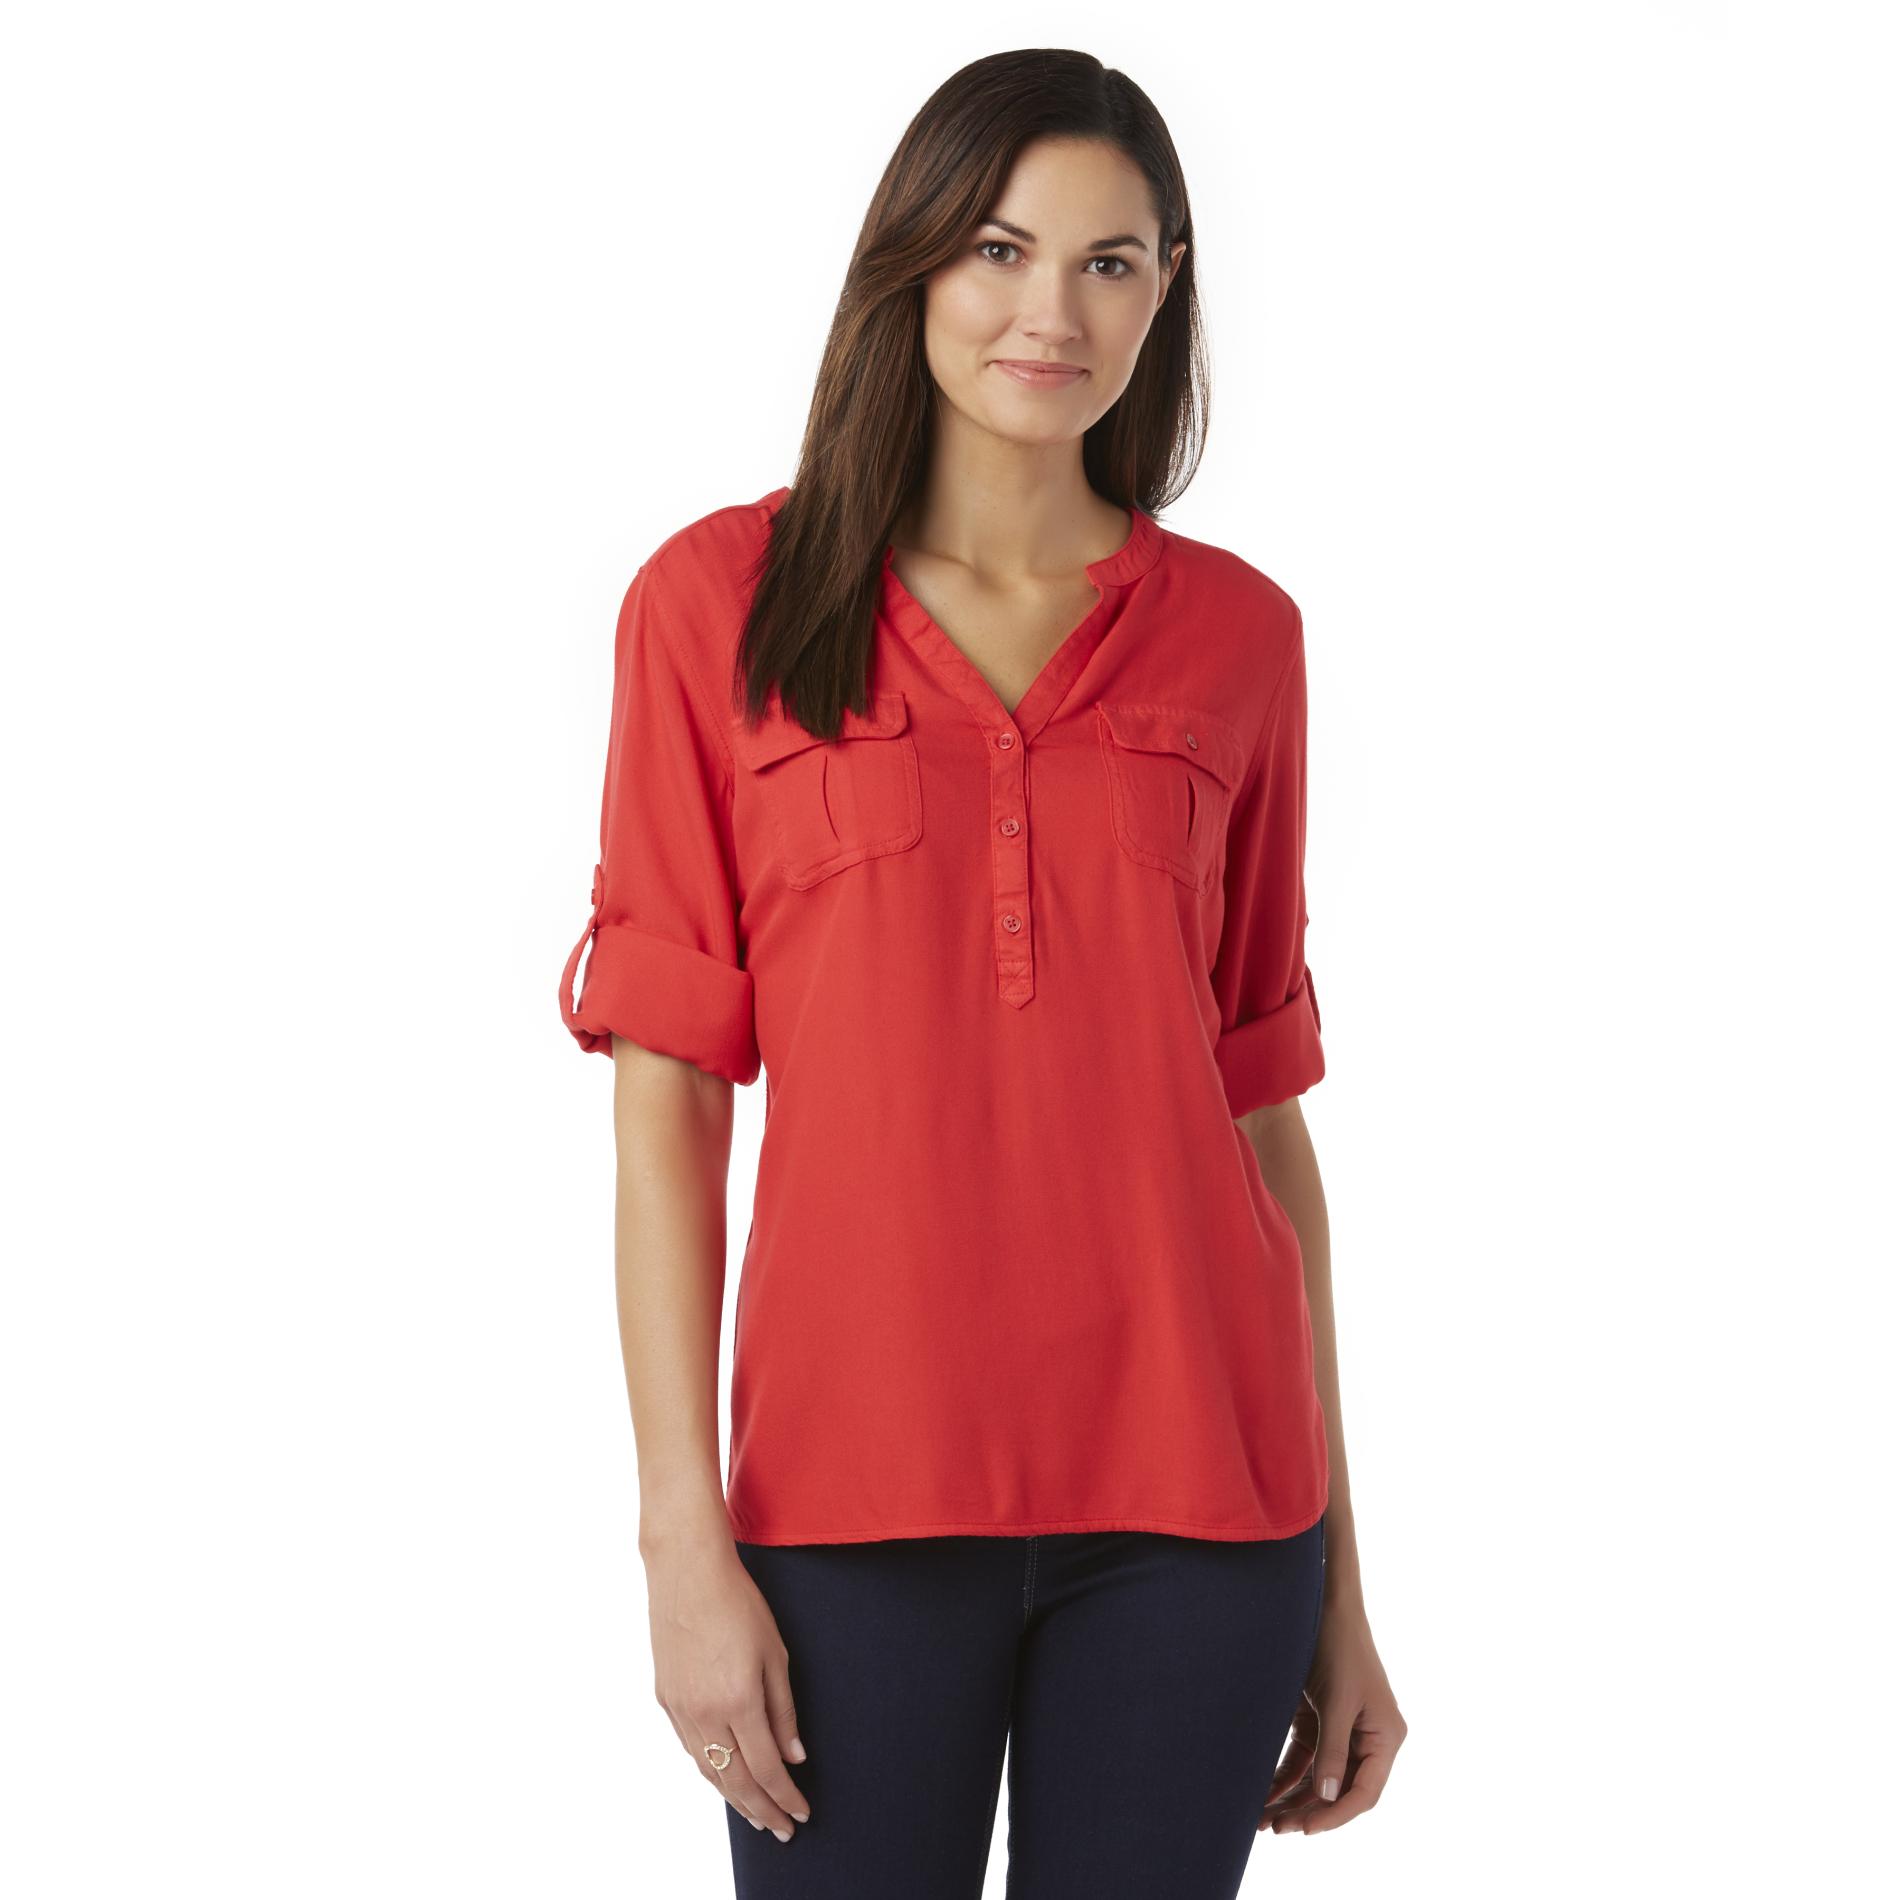 Simply Styled Women's Notched Neck Top